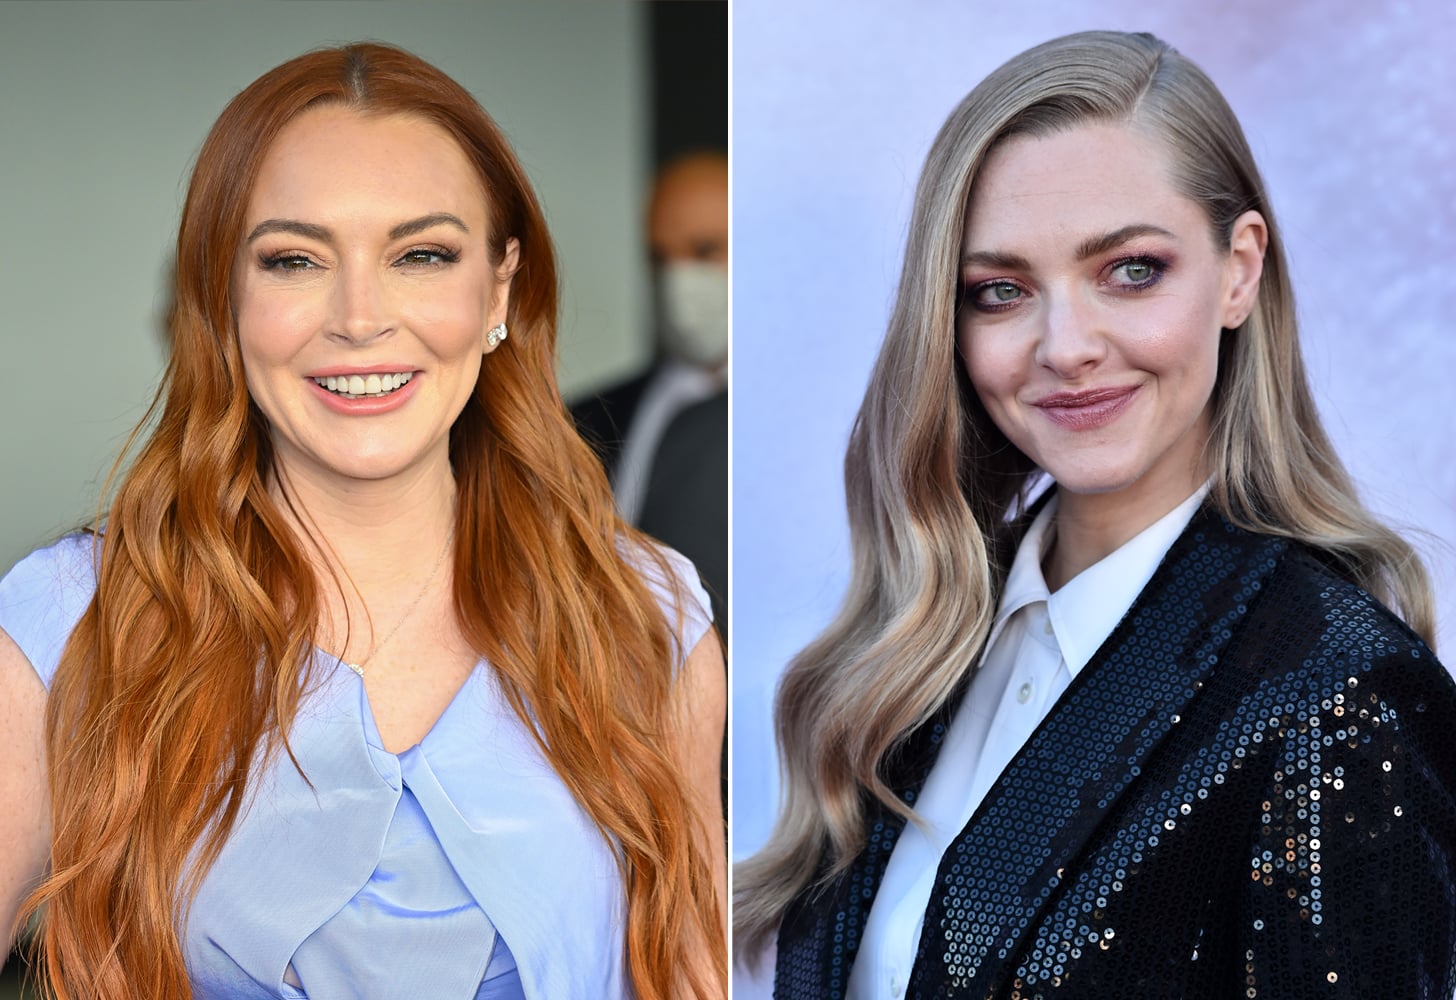 Lindsay Lohan and Amanda Seyfried Both Want a “Mean Girls” Sequel: “That Would Be Really Fun”